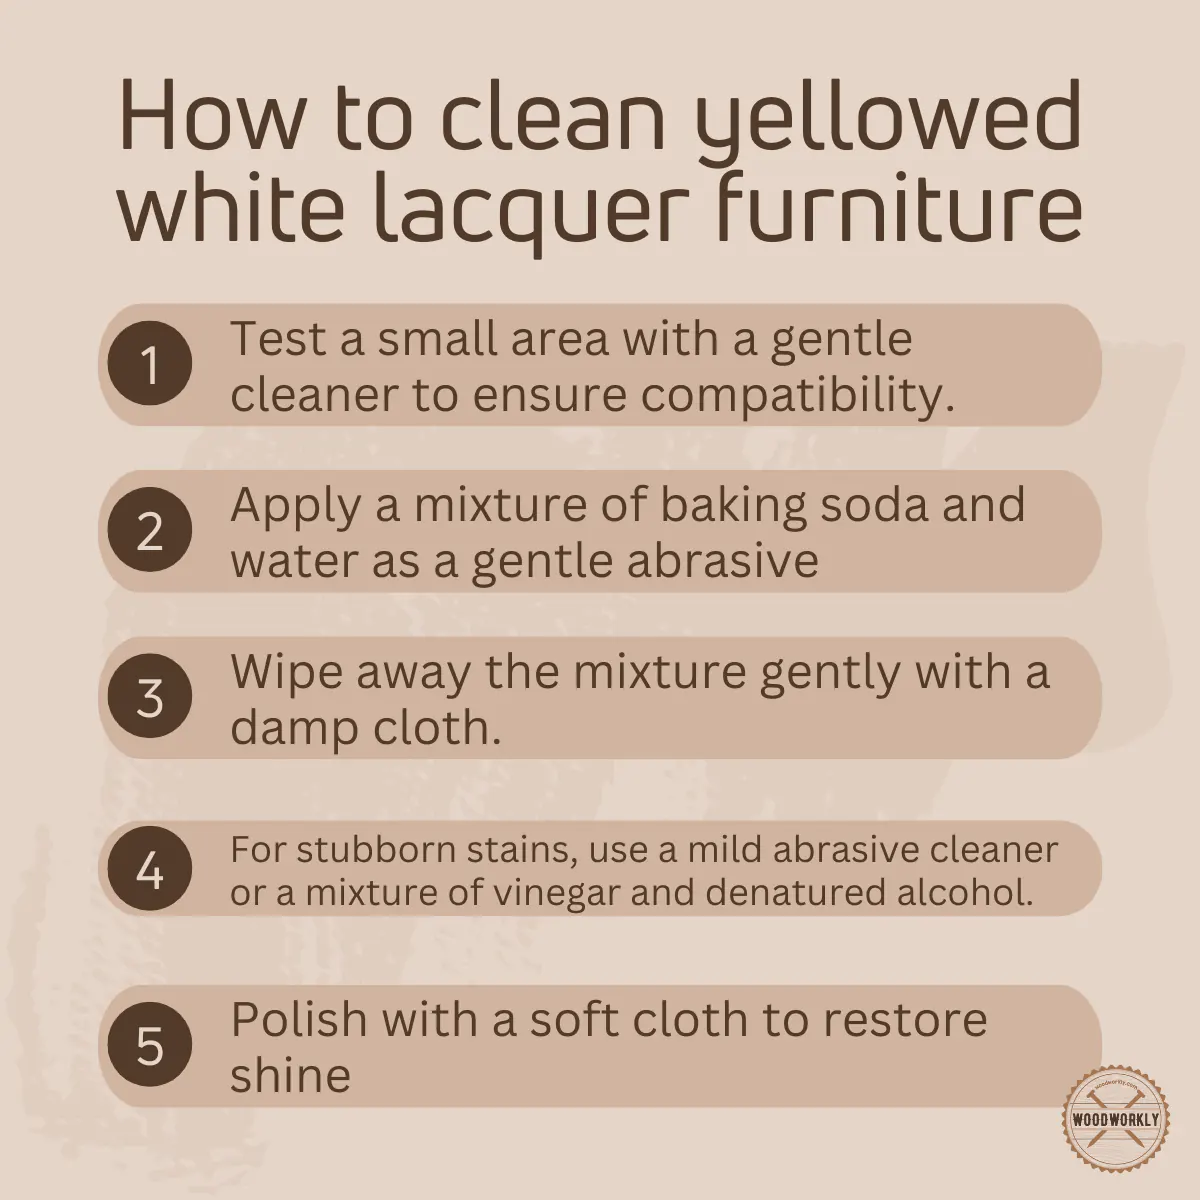 How to clean yellowed white lacquer furniture